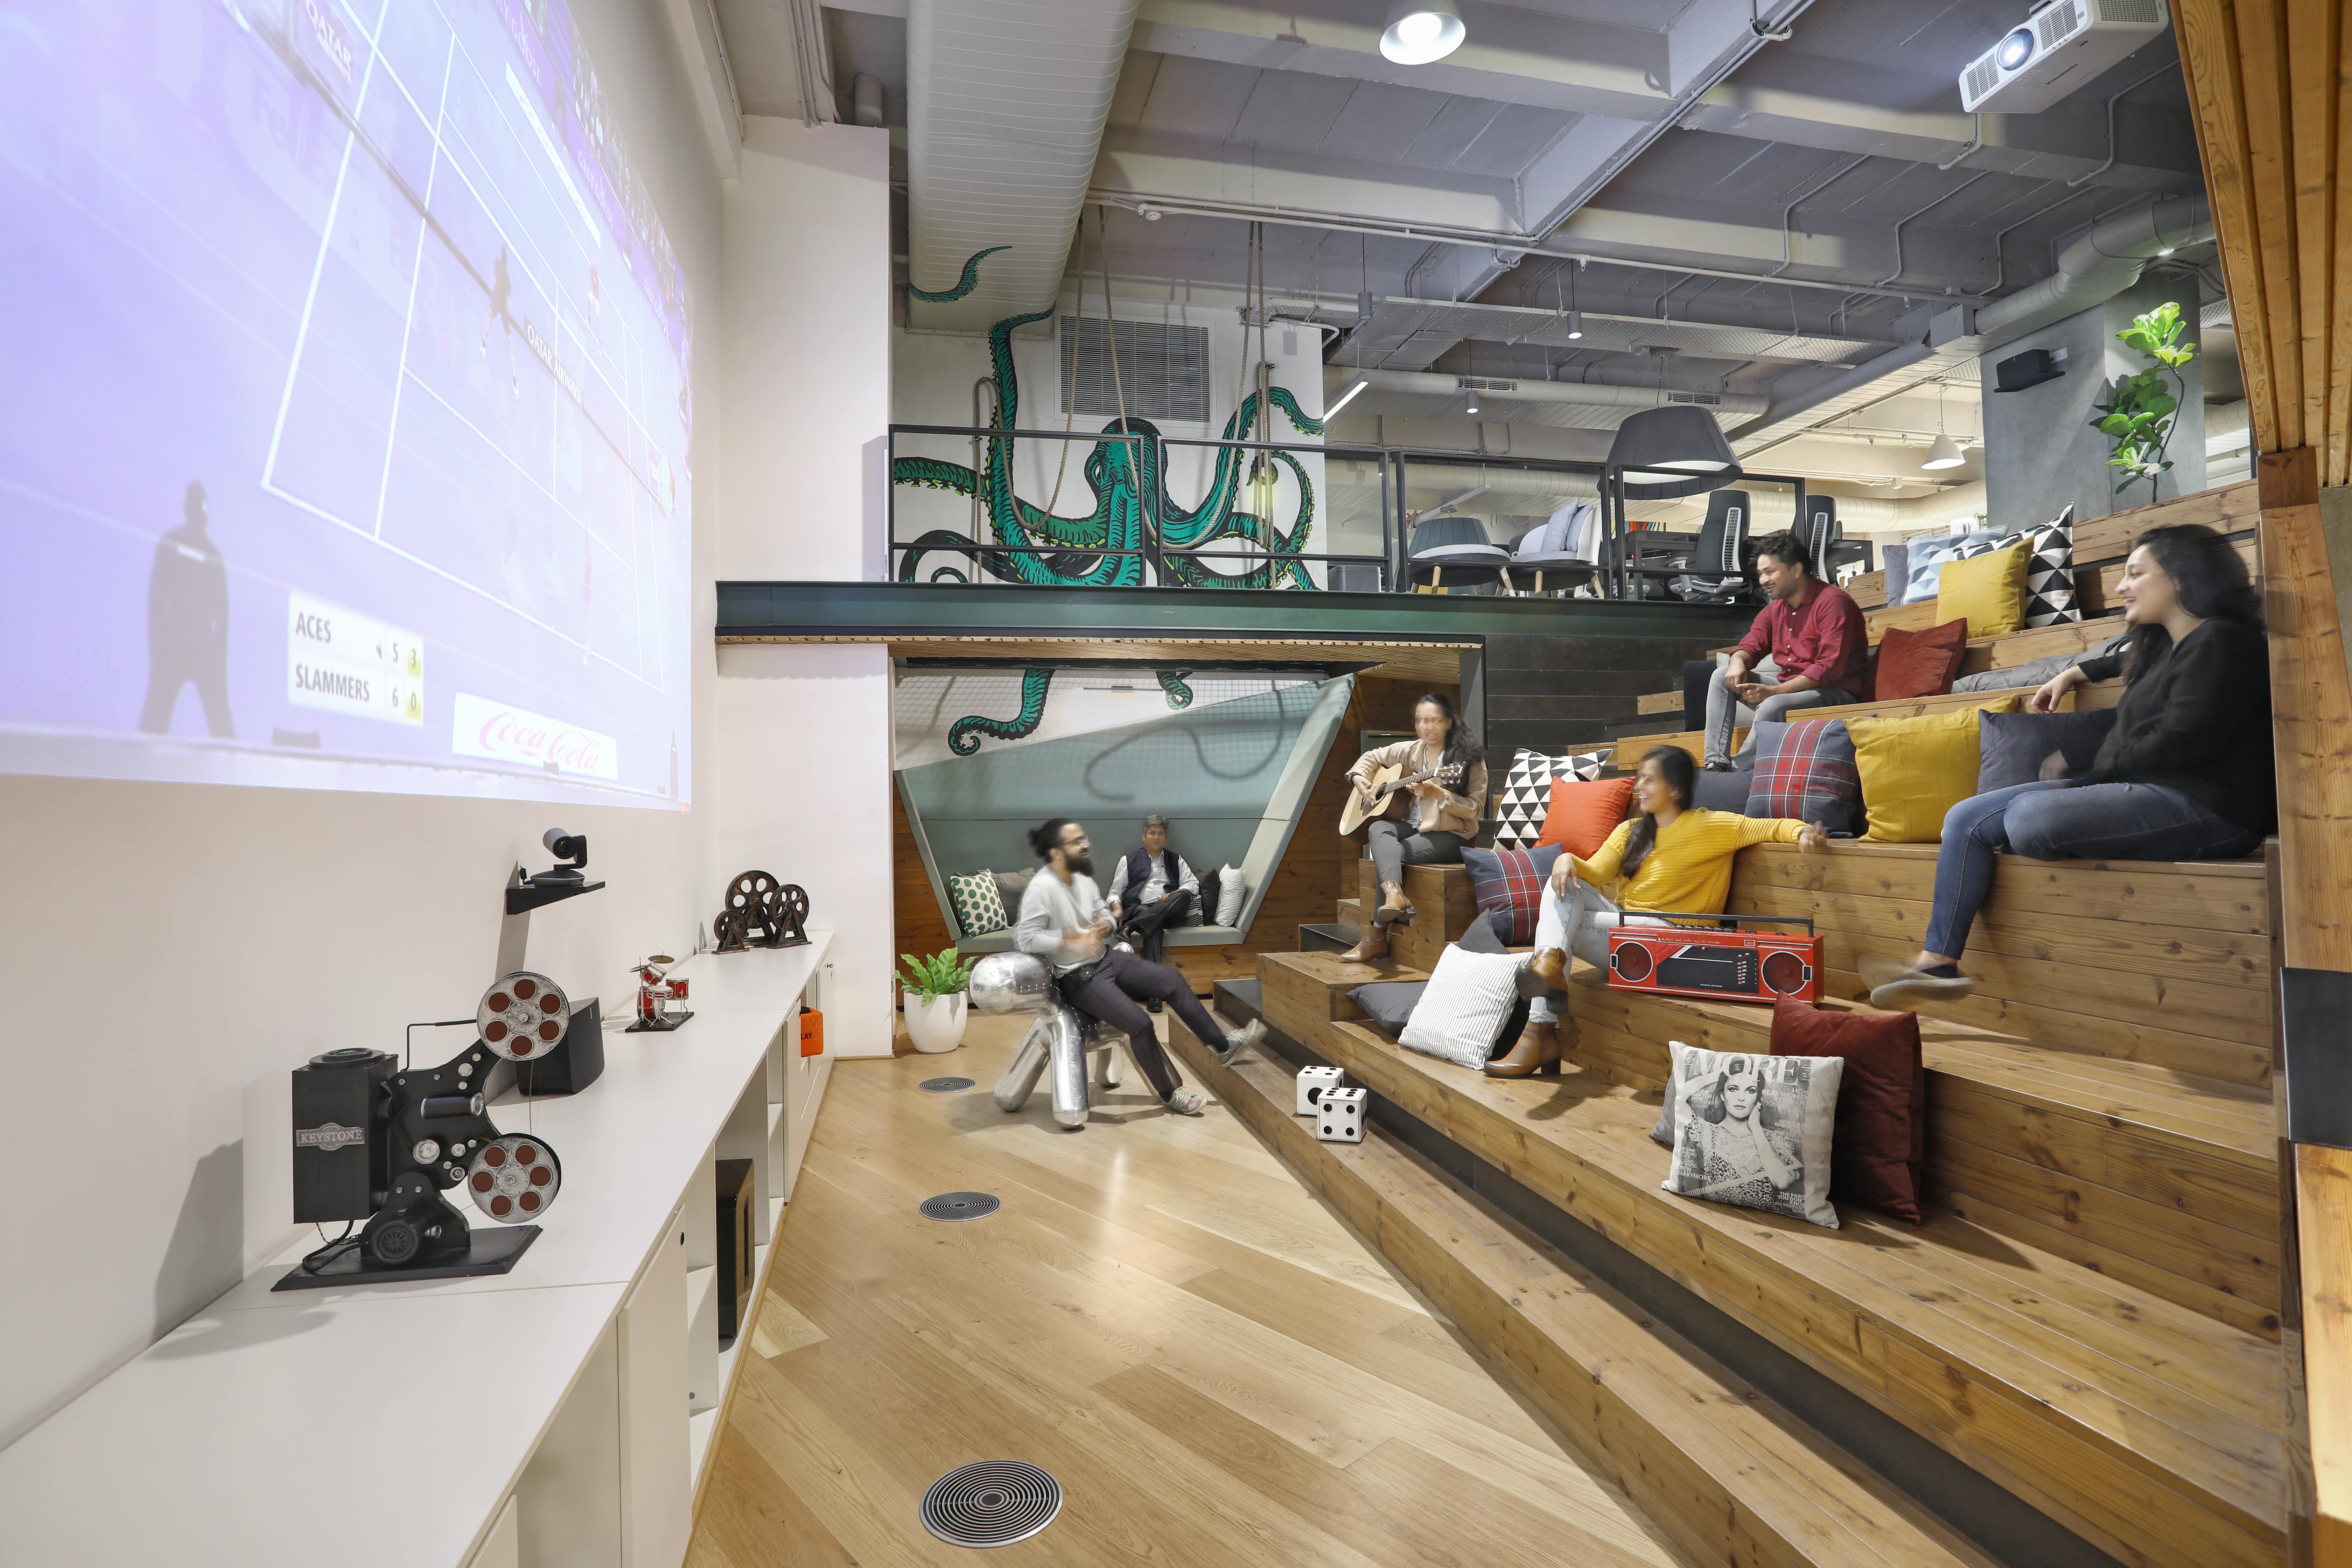 Space Matrix Beta Lab is an incubator workplace that is designed for hybrid work